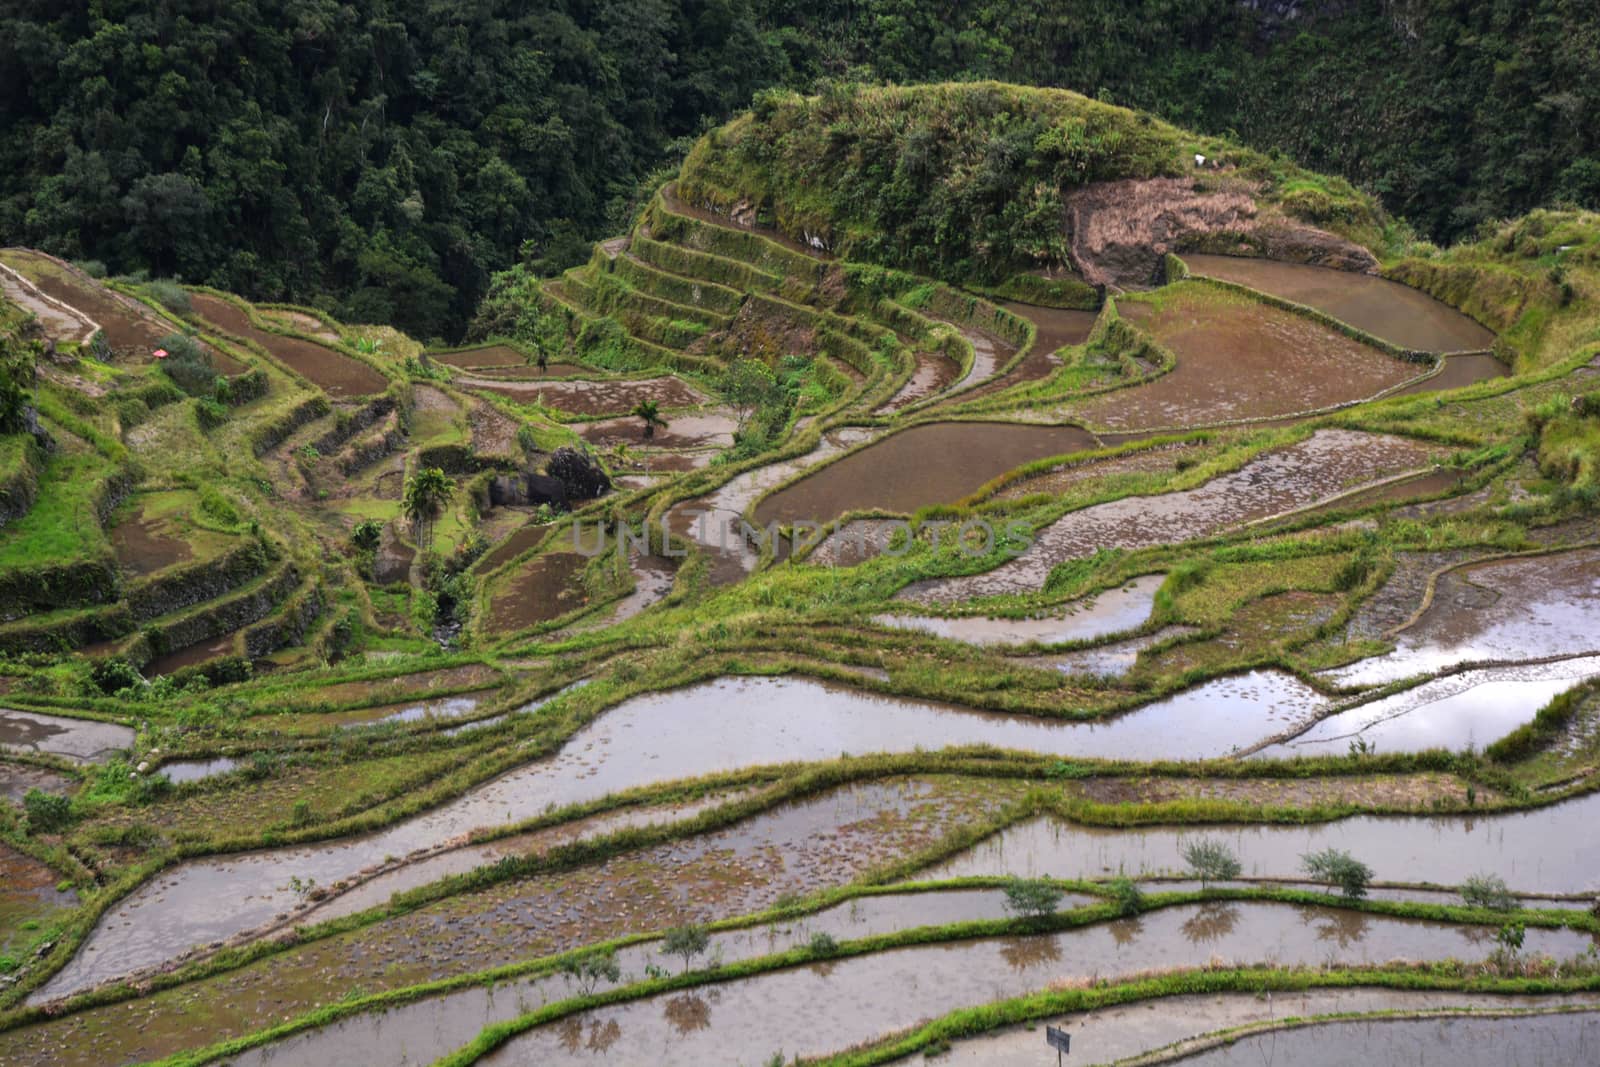 Mountain Valley with Rice Fields on Terraces, irrigated (Ifugao,  Banaue, Philippines). by ideation90